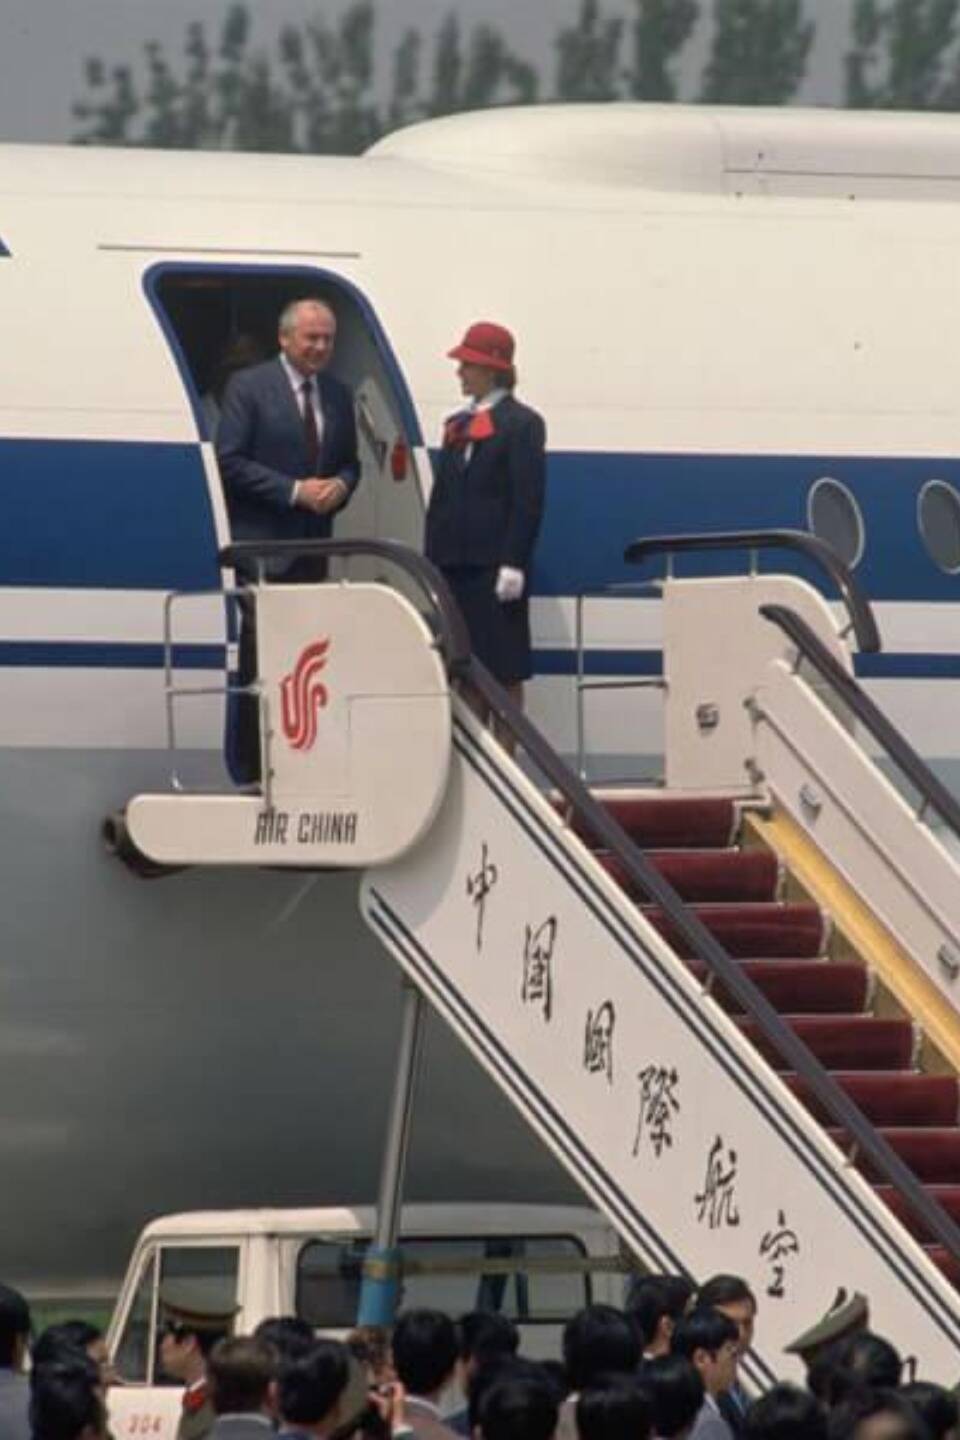 <p>Every duty of a flight attendant comes with a lot of responsibility. It can also become a bigger job, if there are high-profile passengers on board. This photo taken in 1989 shows Soviet leader Mikhail Gorbachev arriving in Beijing, China.</p> <p>Escorting him off the aircraft is a flight attendant. Standing next to Gorbachev, she was a part of history as he was photographed walking off of the plane. He was the first Soviet leader to arrive in China since Khrushchev visited in 1959.</p>